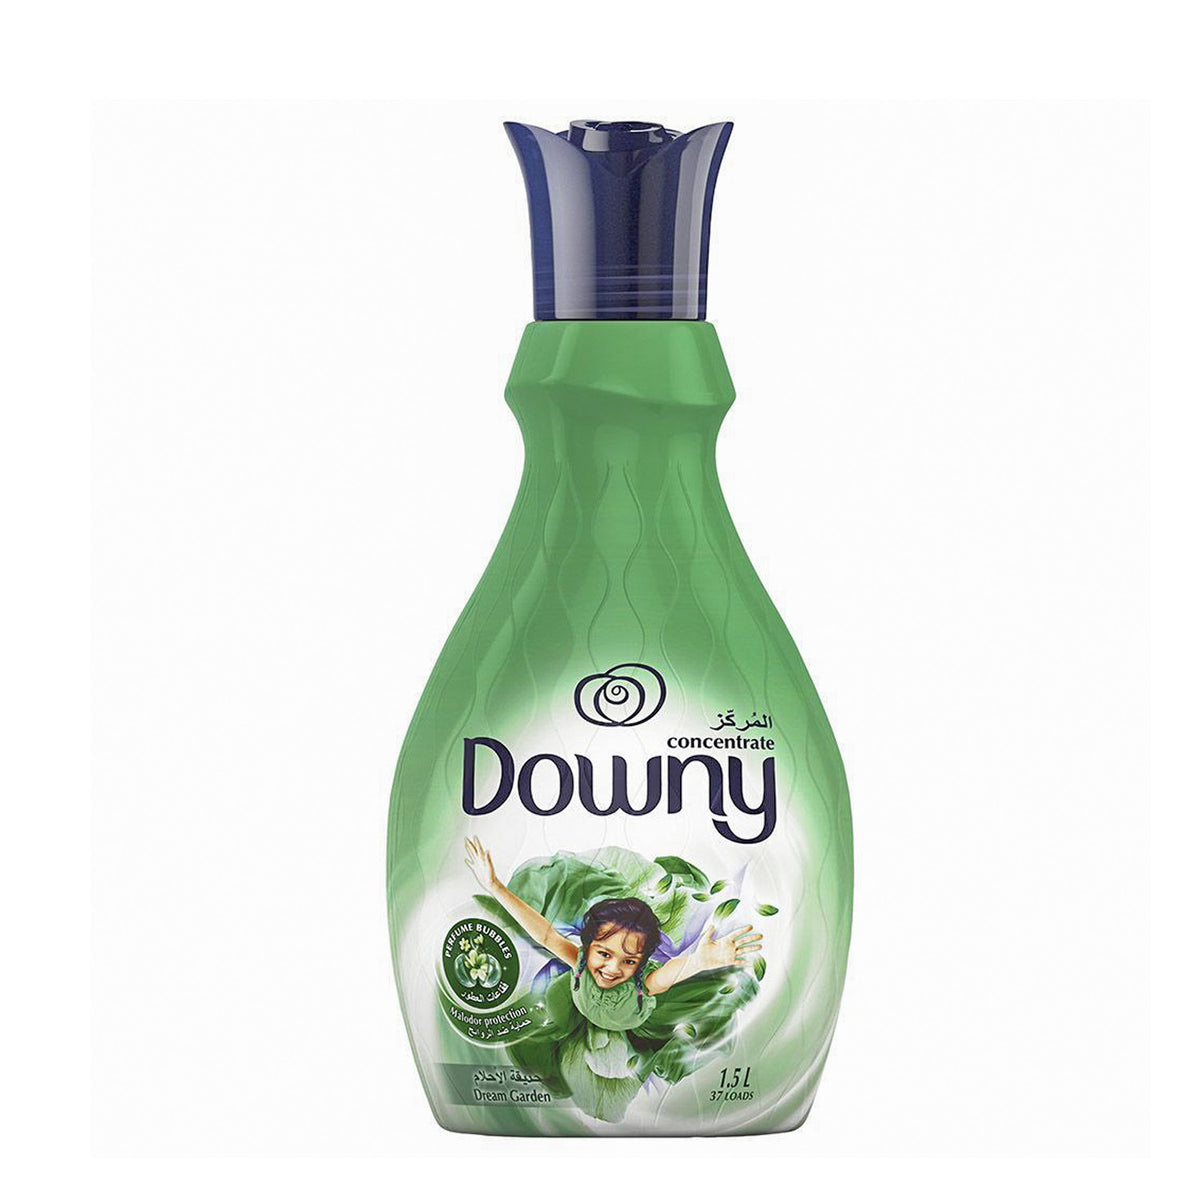 Downy Concentrate dream garden 1.5ltr